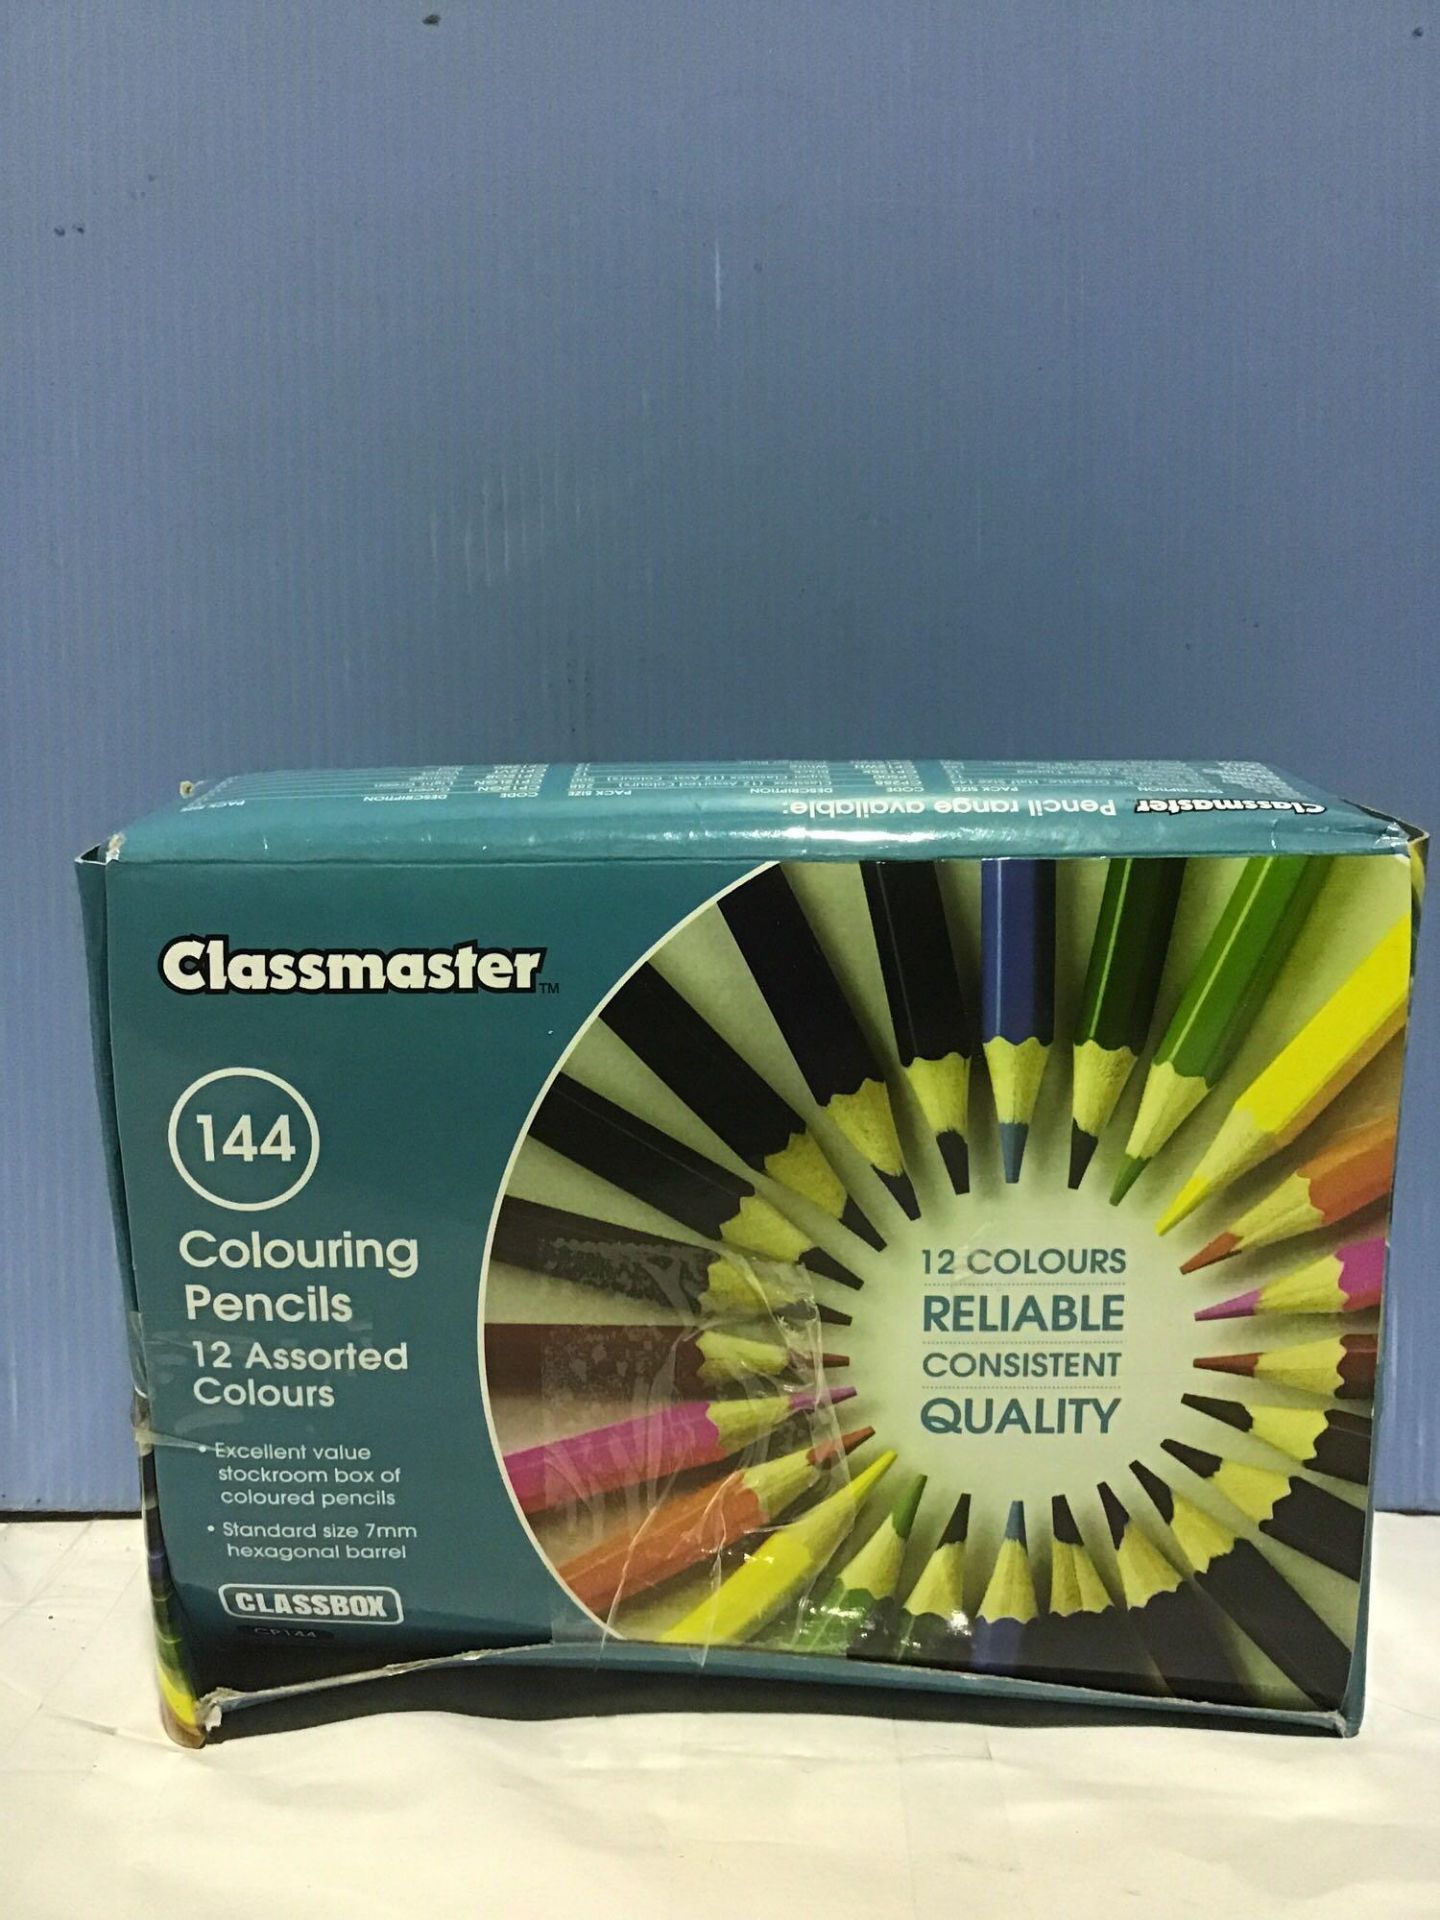 Classmaster Class Box Colouring Pencils – Standard Full-Size, Pre-Sharpened Wooden Set £15.67 RRP - Image 3 of 5